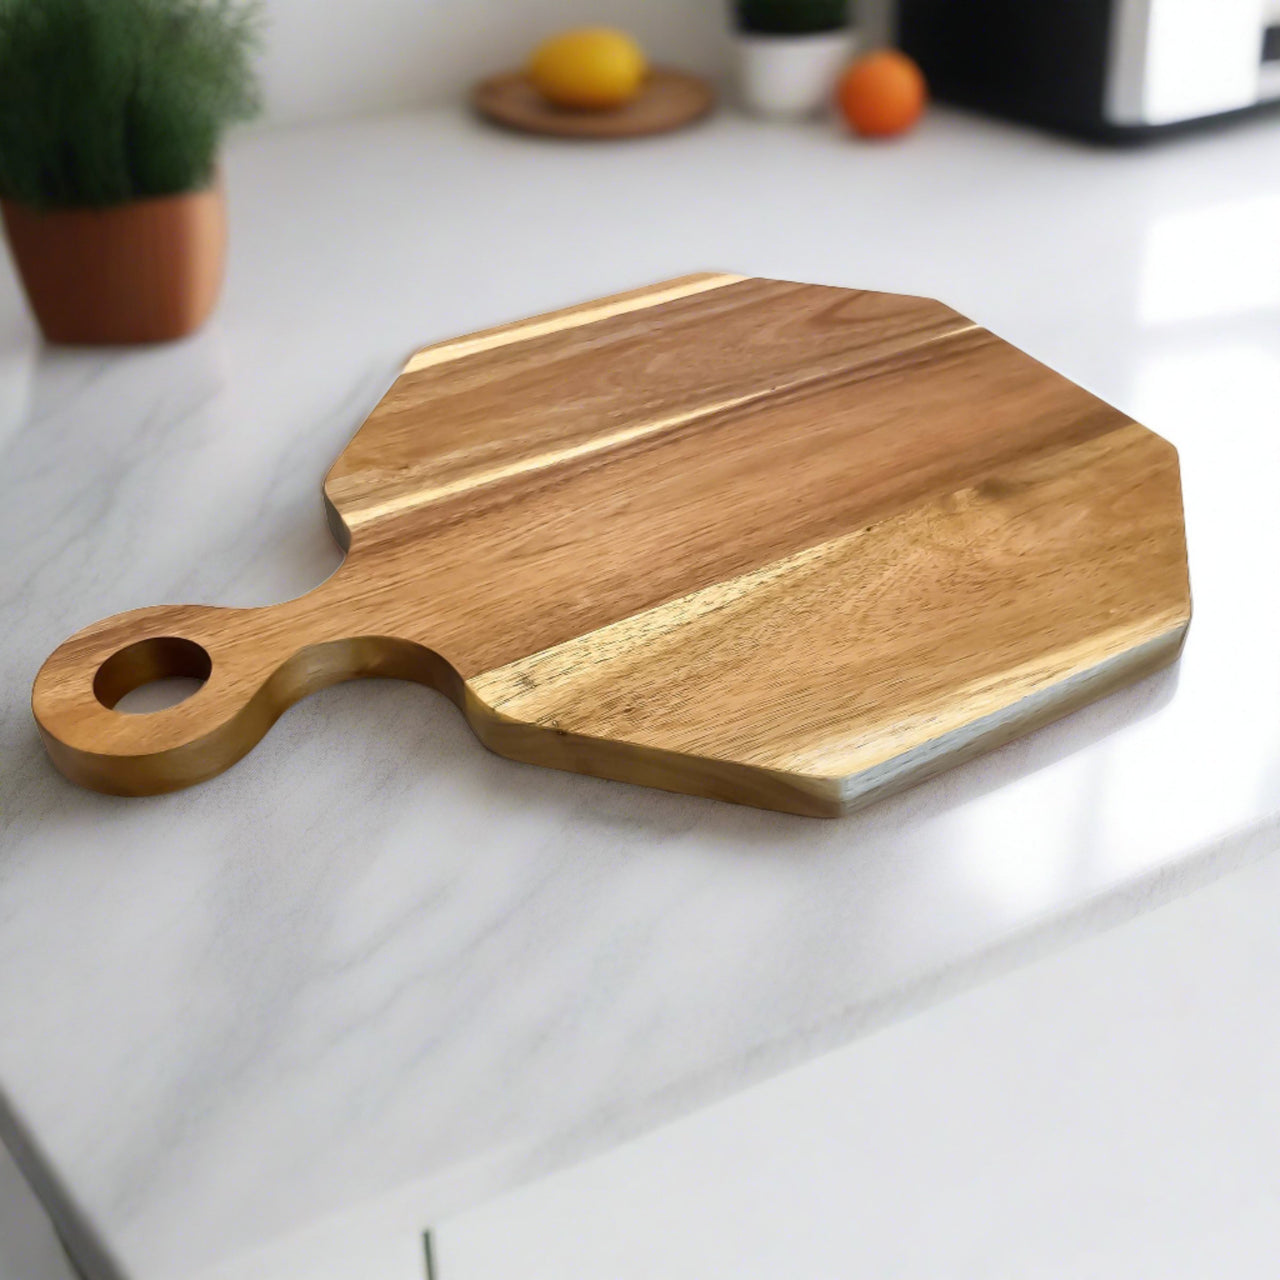 *Buy 1 Get 1 Free The Charcuterie Board + Free Engraving